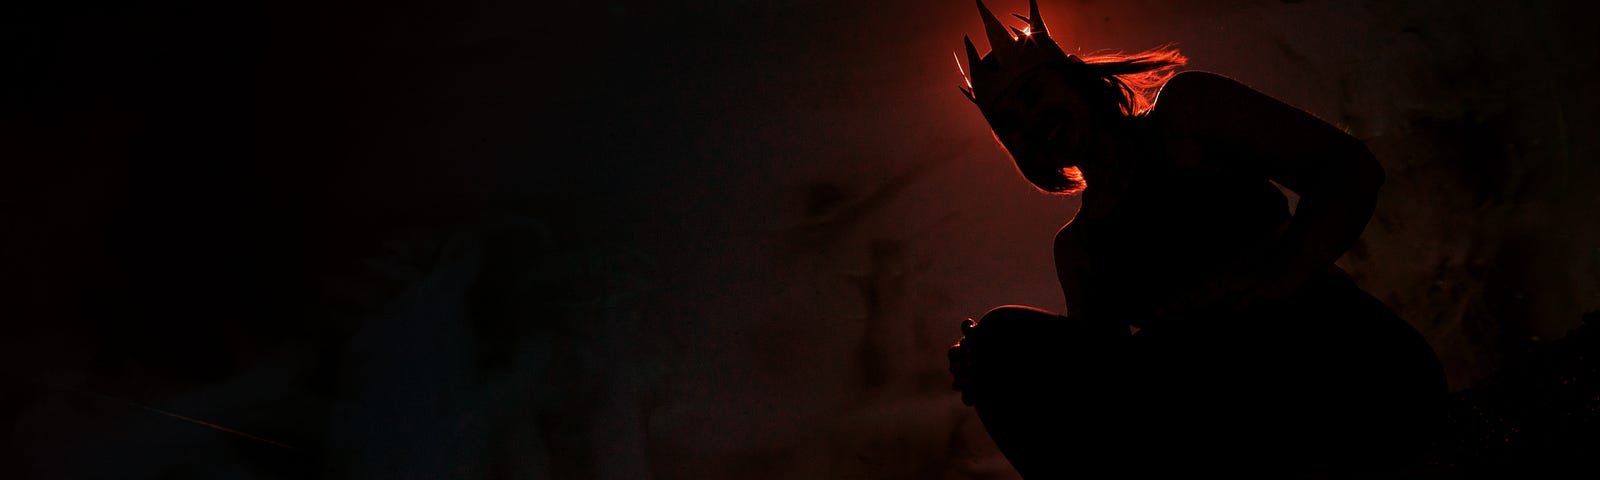 Dark silhouette, backlit with red, wearing a crown